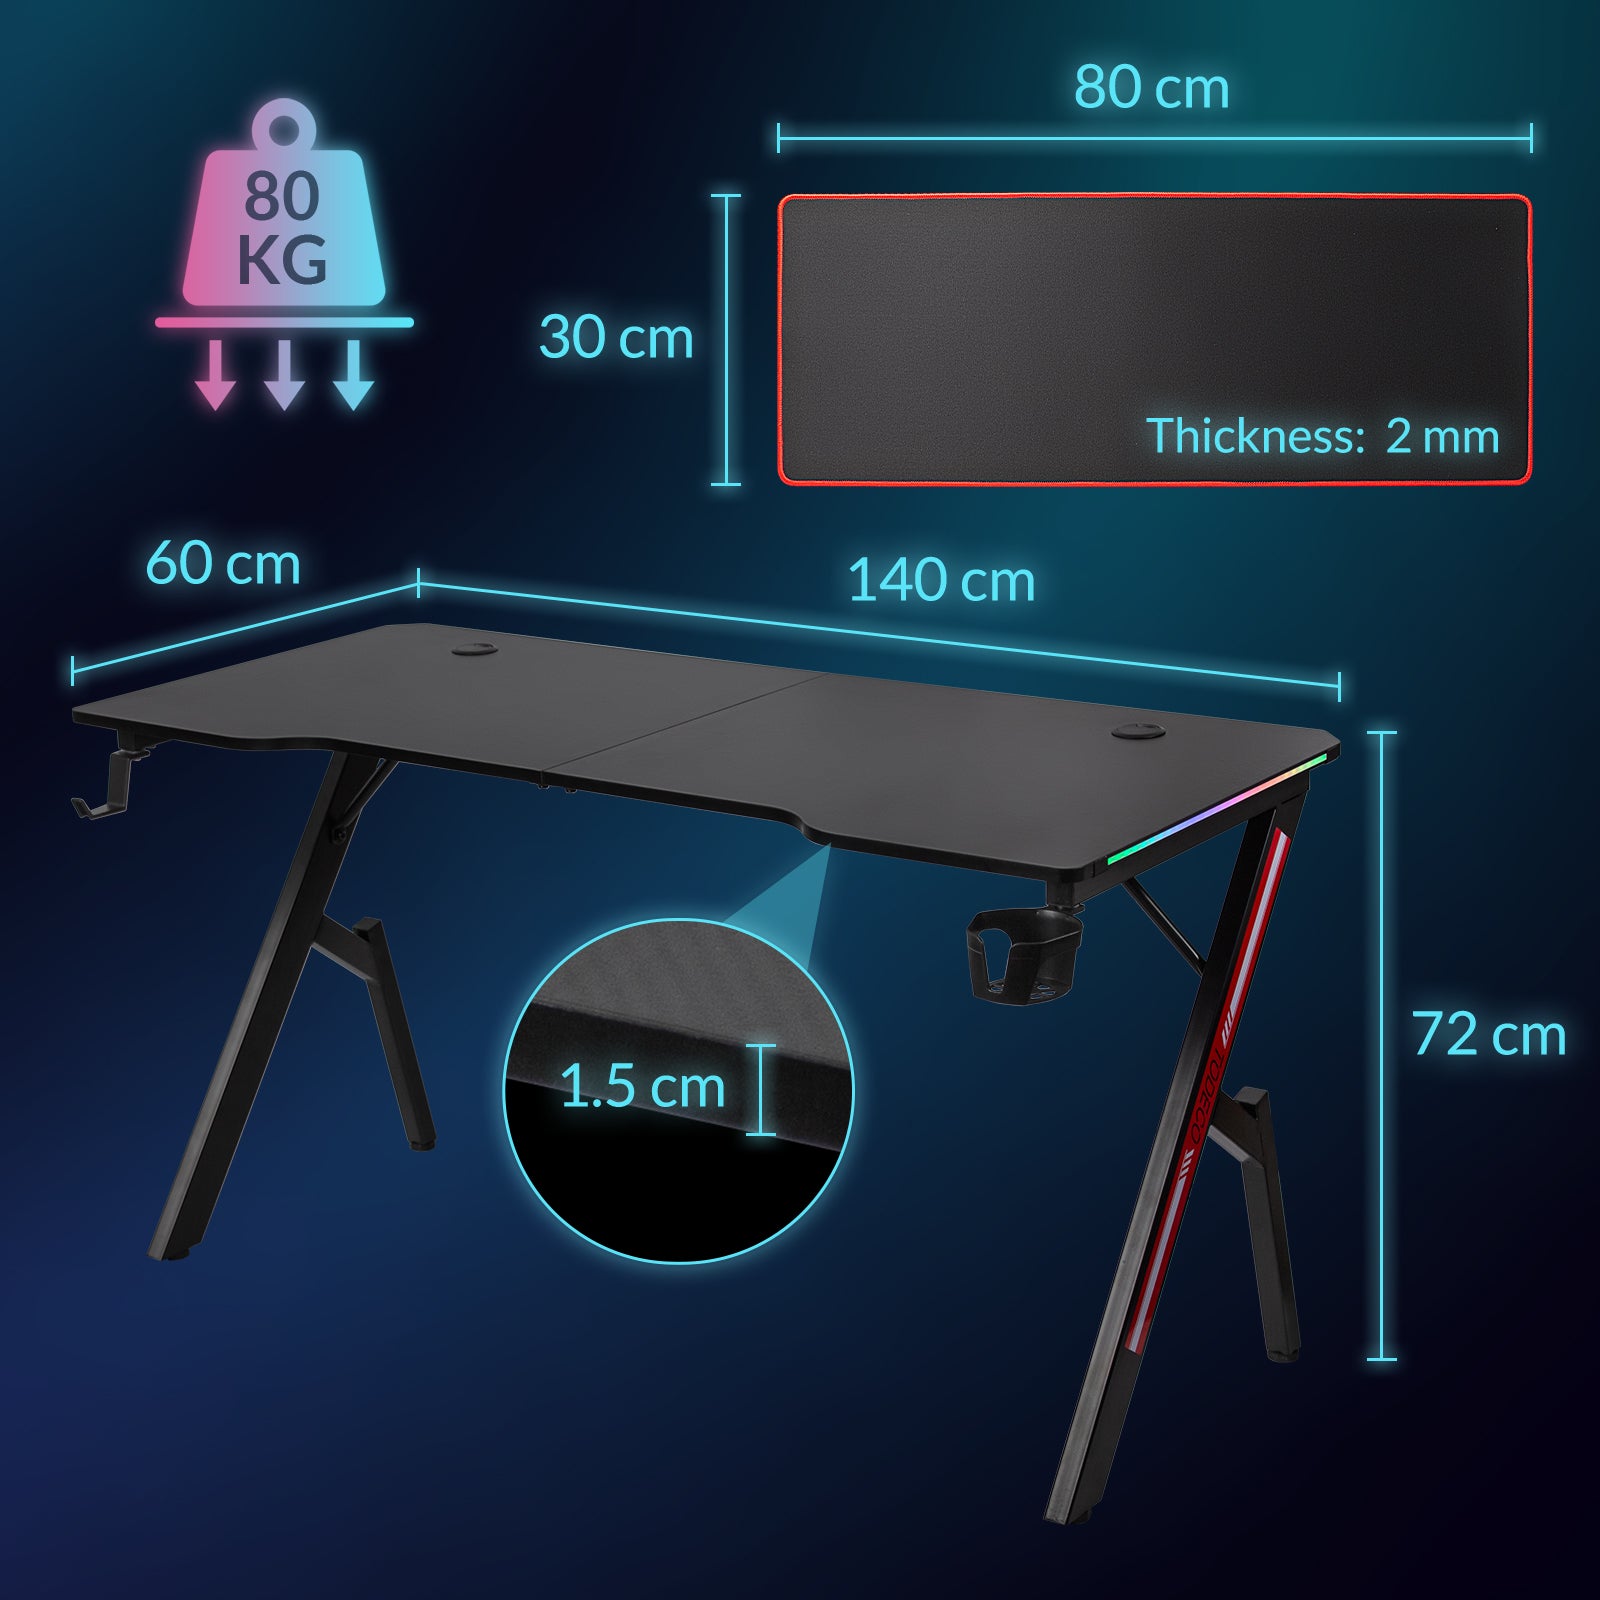 Todeco-LED-Gaming-Desk-140-x-60cm-Large-Gaming-Desk-with-Carbon-Fiber-Top-Ergonomic-Desk-with-Mouse-Pad-Cup-Holder-and-Headphone-Hook